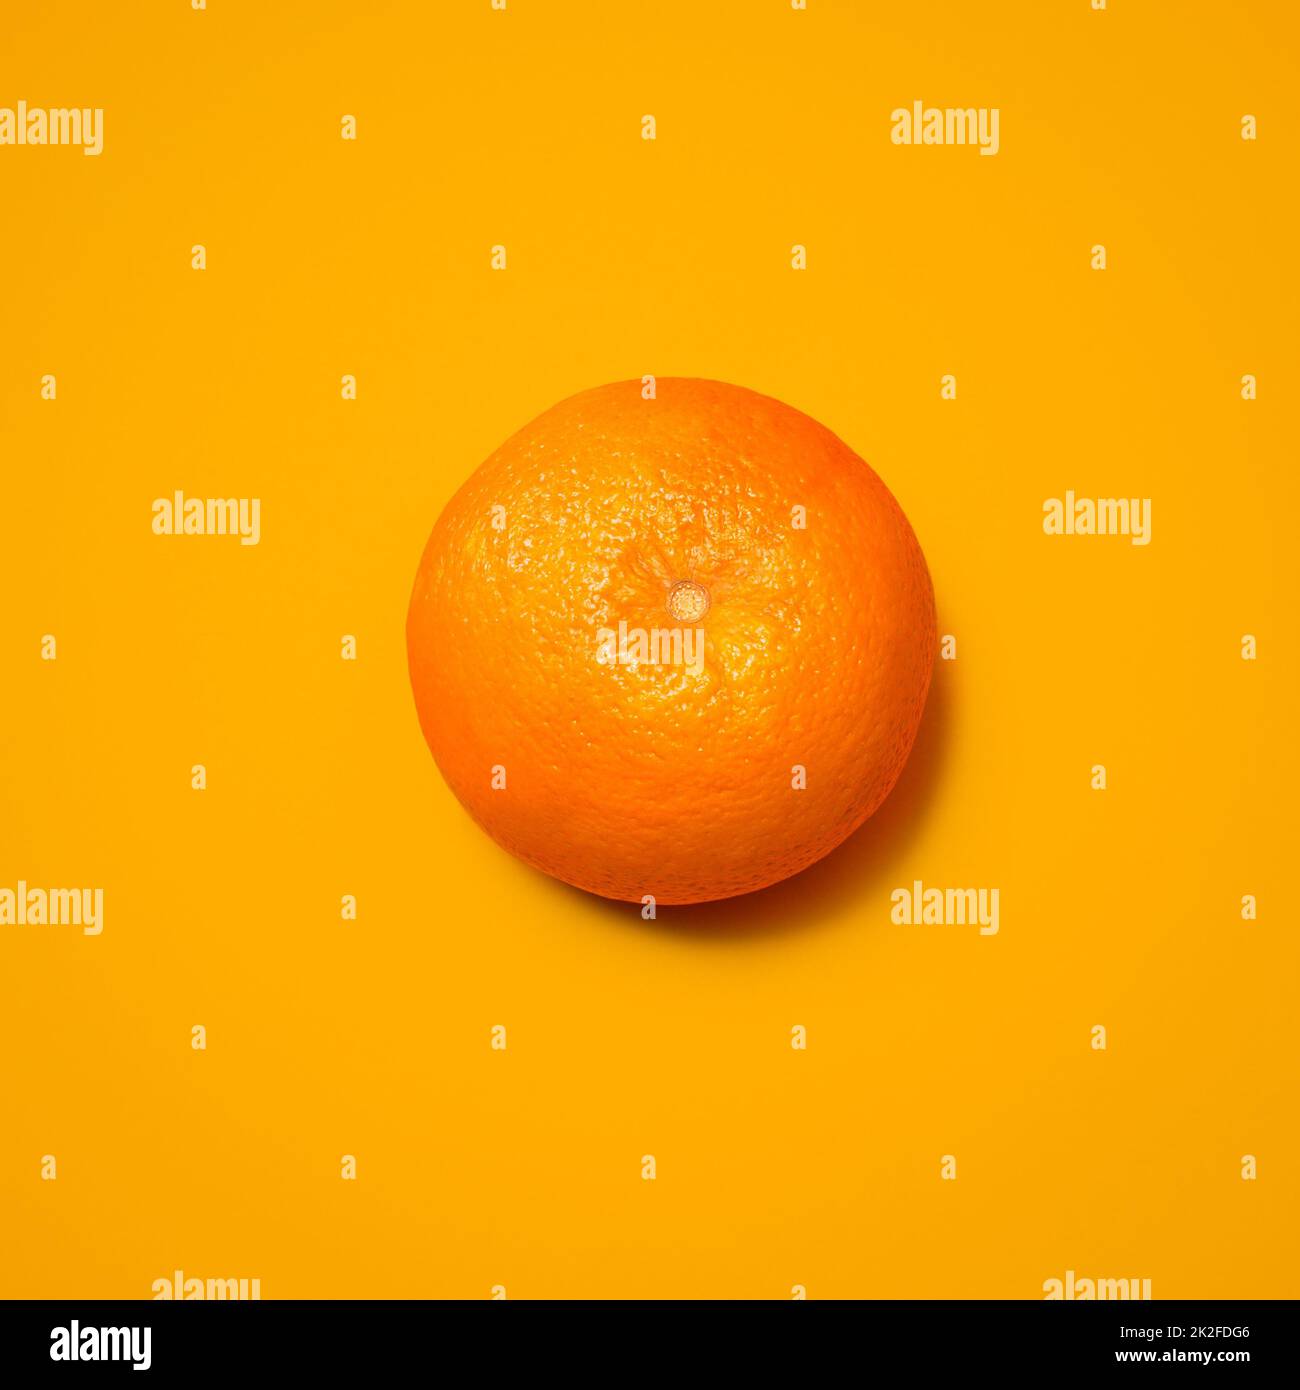 The perfect concentrate. Shot of an orange against a studio background. Stock Photo